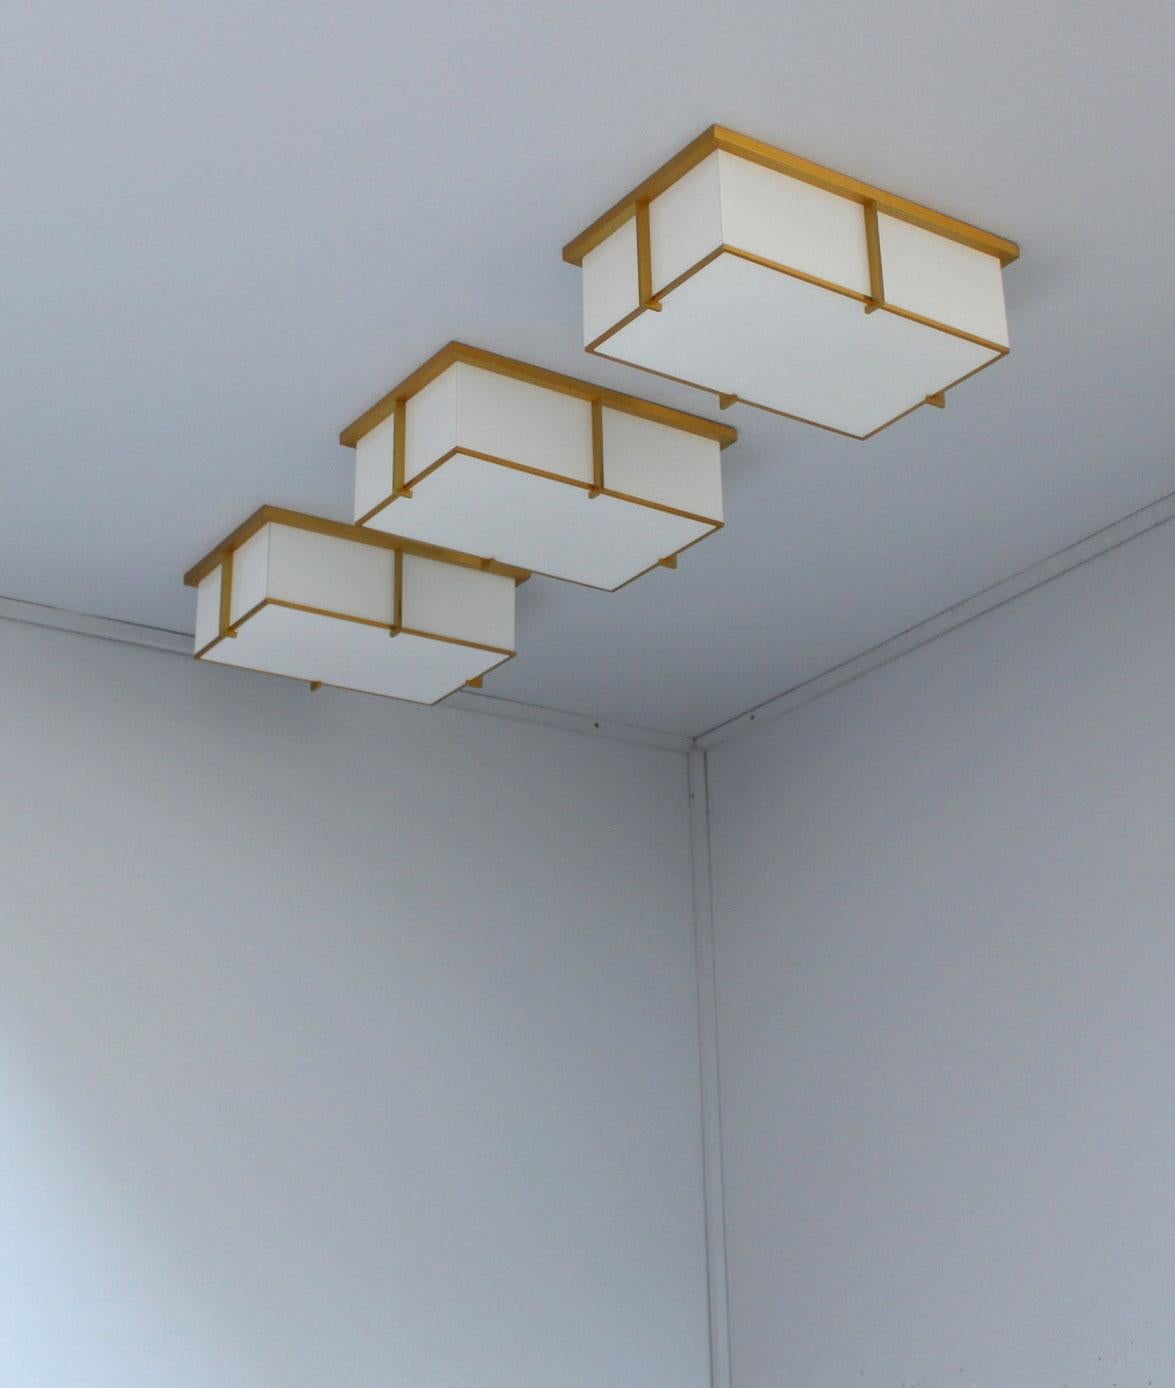 Mounted on a gold lacquered bronze frame that holds the white laminated glass diffusers. The flat square horizontal diffuser is easily removable in order to change the bulbs.